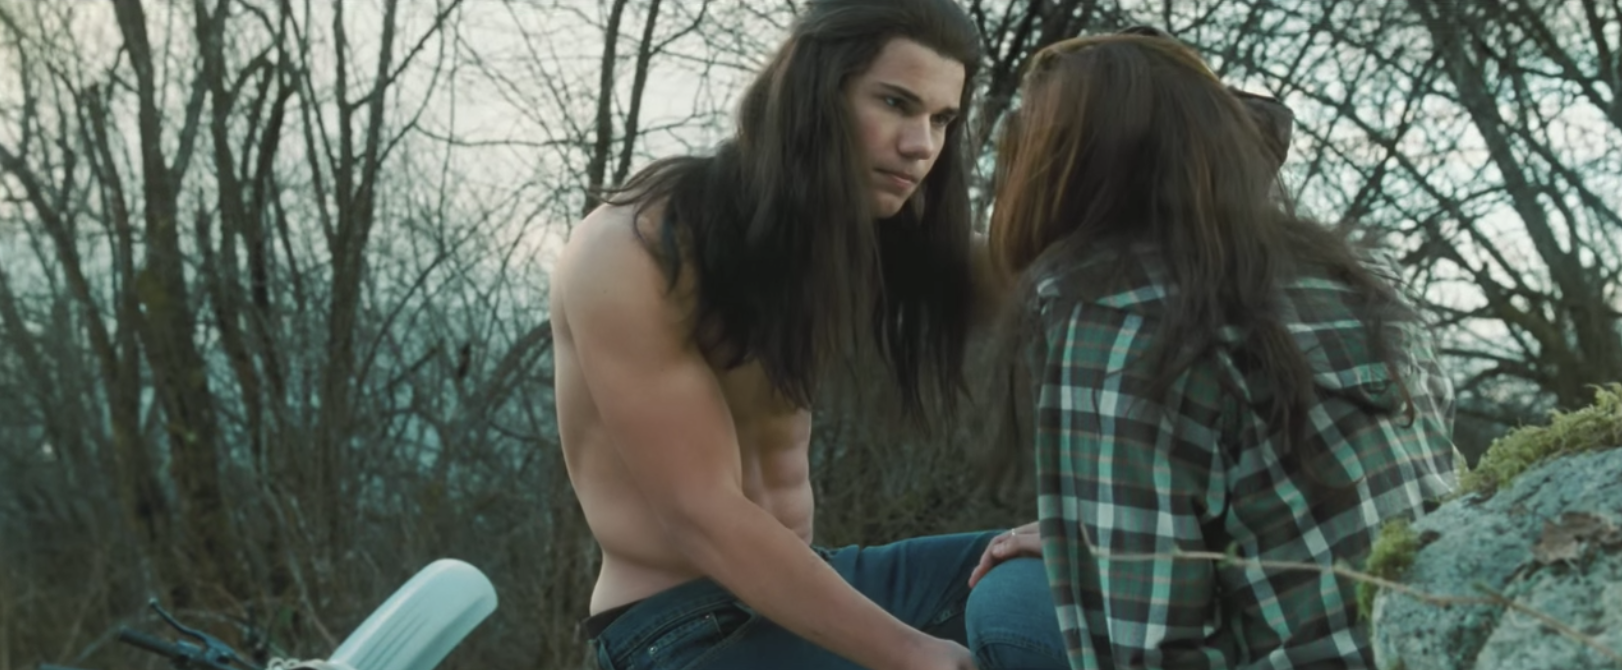 Jacob and Bella in New Moon